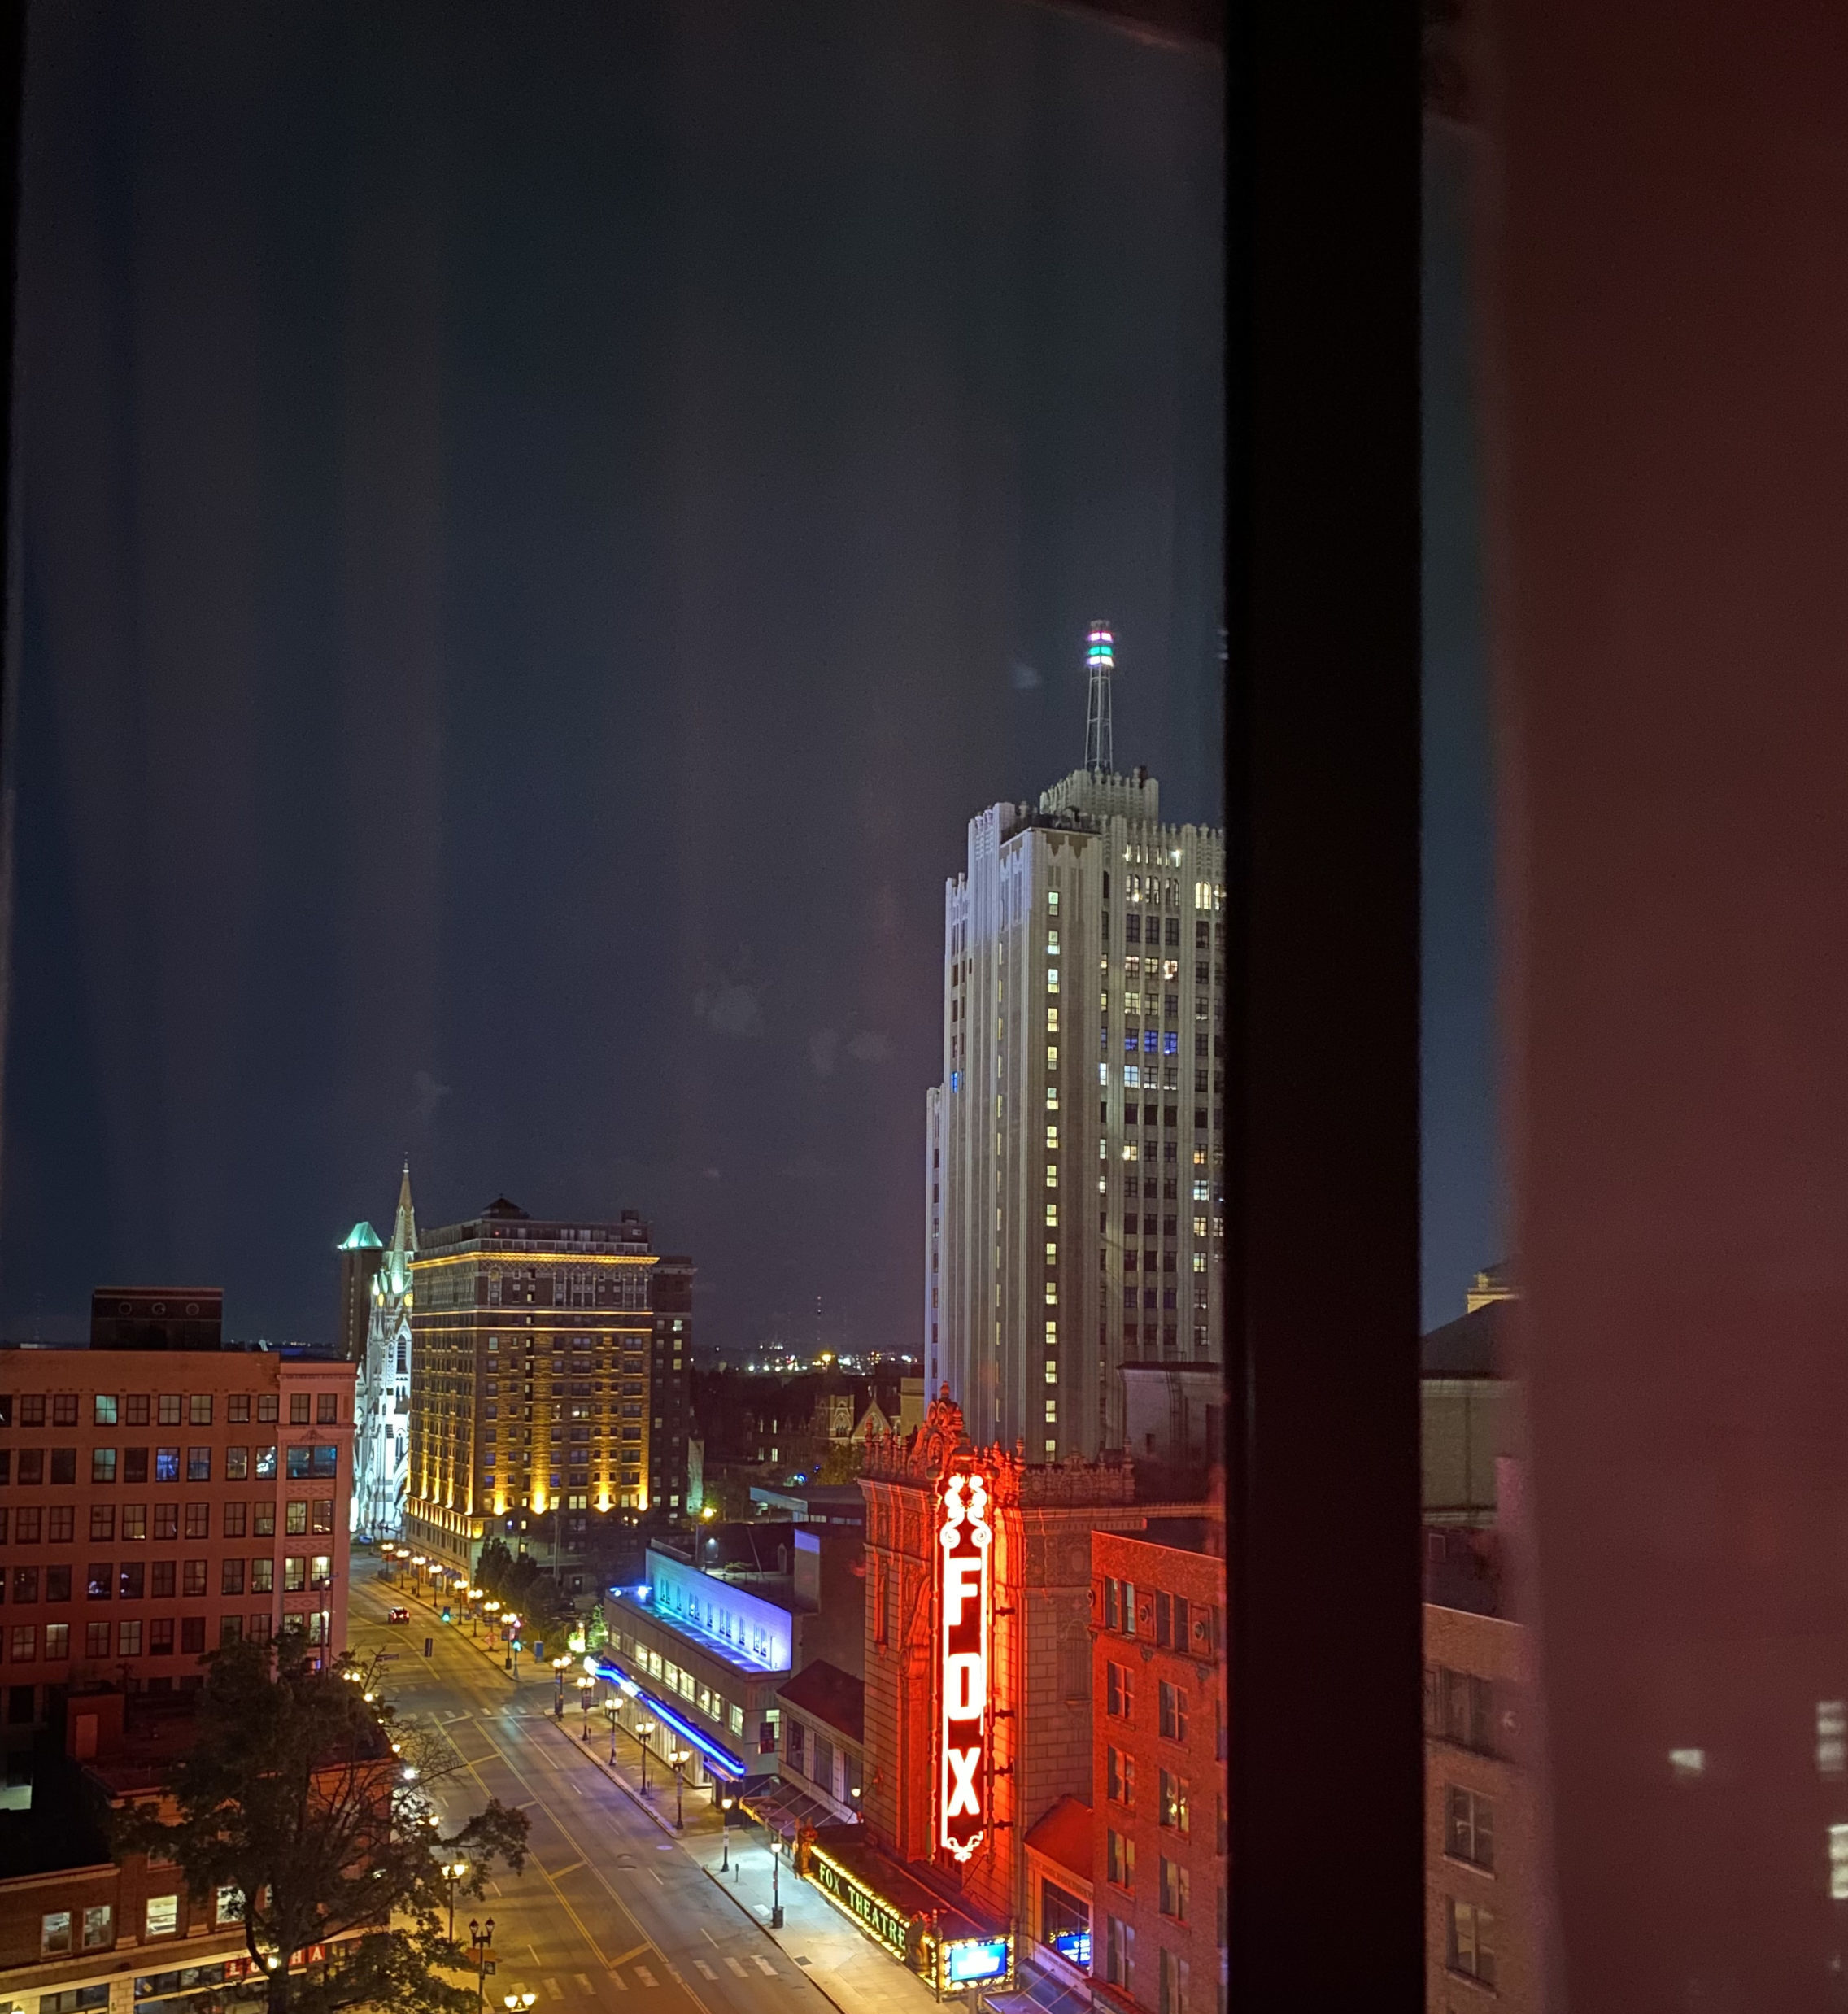 The St. Louis Arts District at night